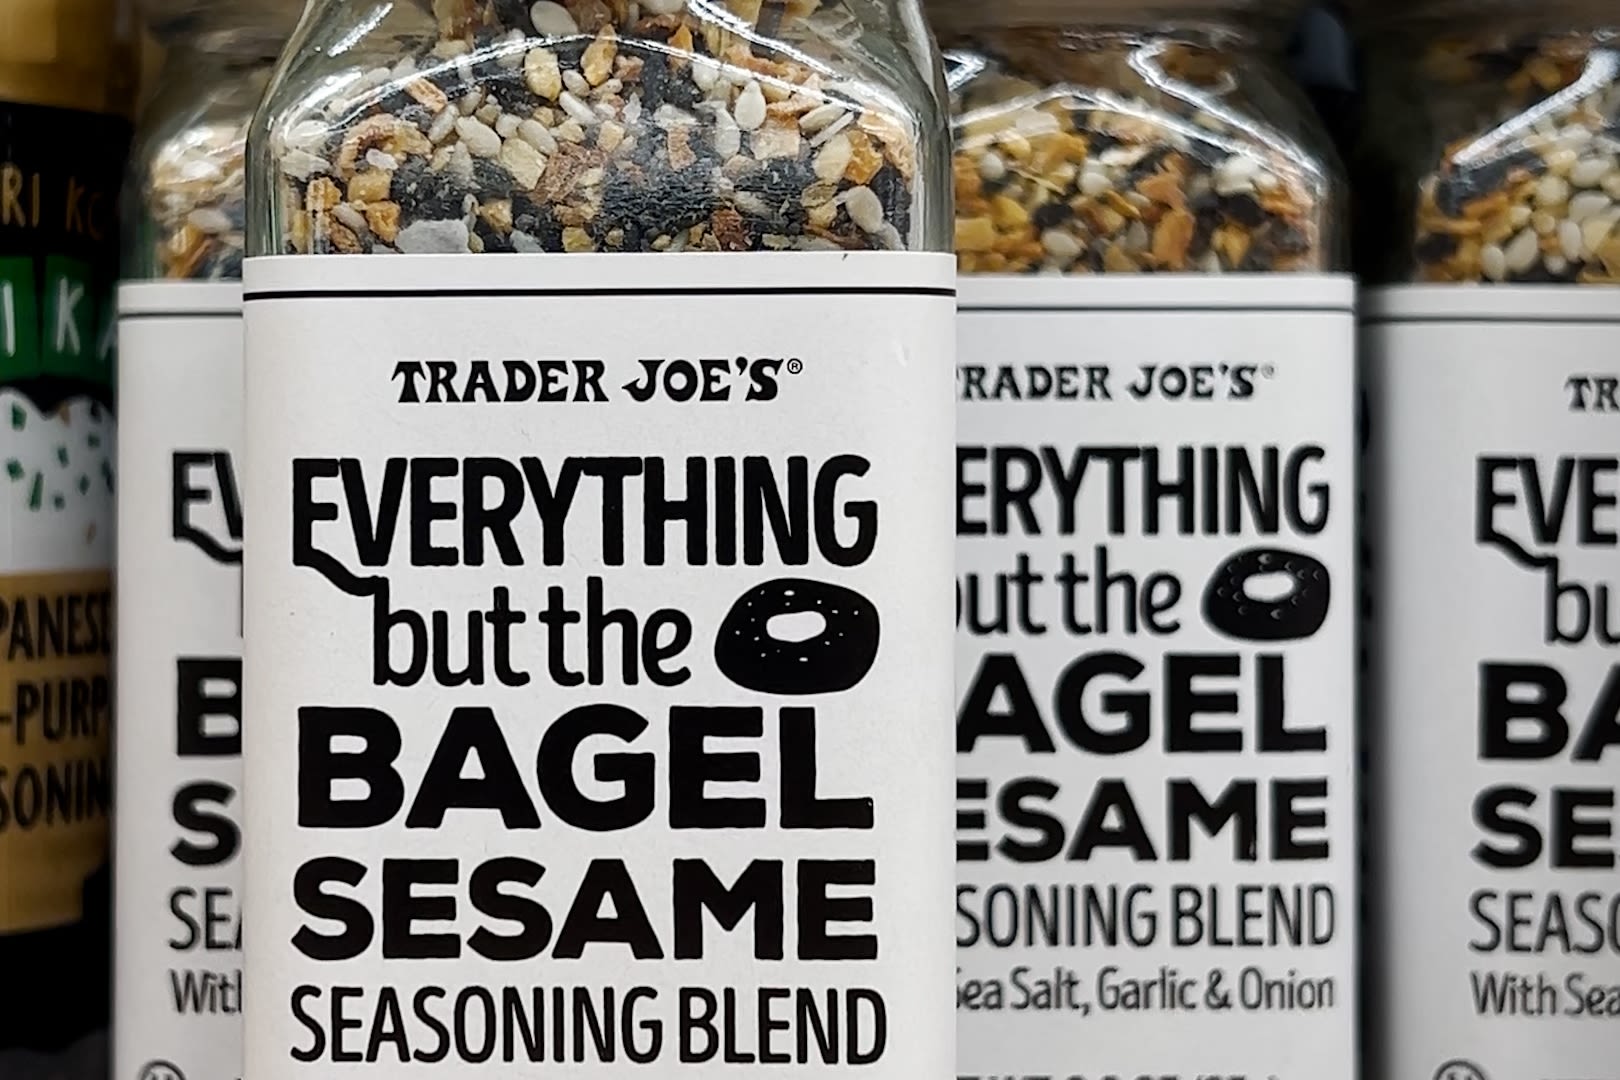 This Trader Joe’s seasoning is a hot item. In South Korea, it’s illegal.